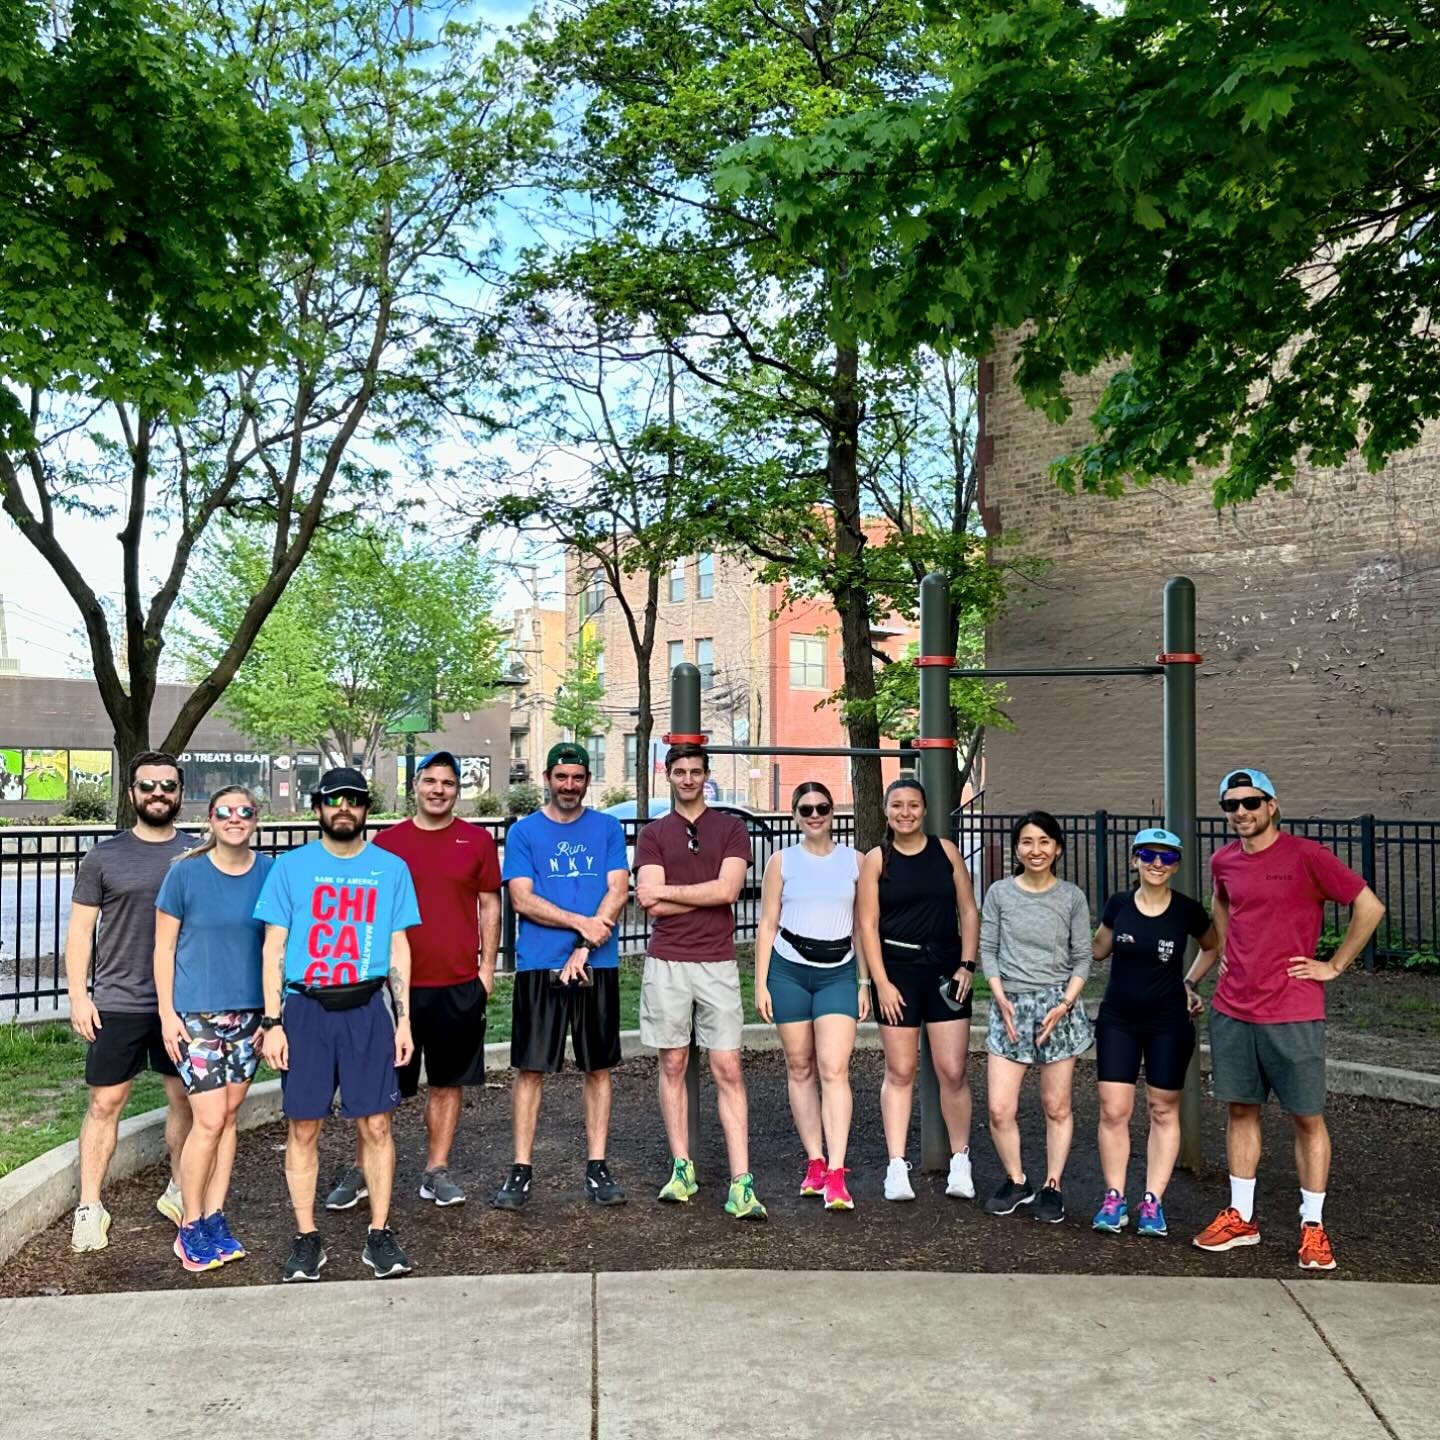 Another day in run club paradise 😎

Instead of purchasing cigs we just sign up for another race 🤷&zwj;♂️ 

Forever Pace Run Club meets every Wednesday at 6:30pm for a run on the 606 trail. Tell your friends and come run with us!

#foreverpace #fore